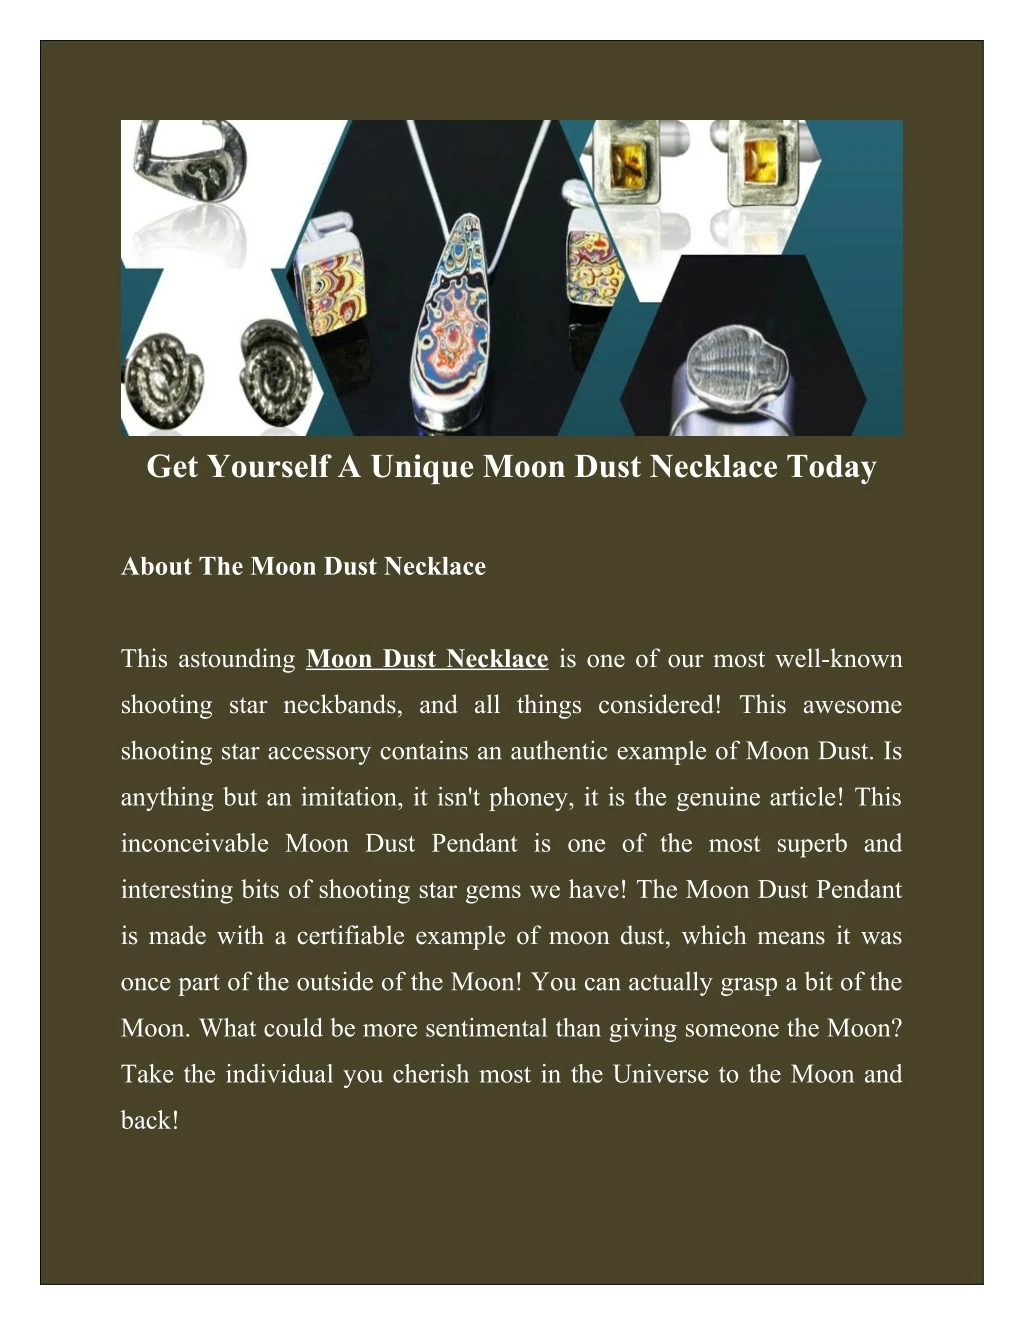 get yourself a unique moon dust necklace today